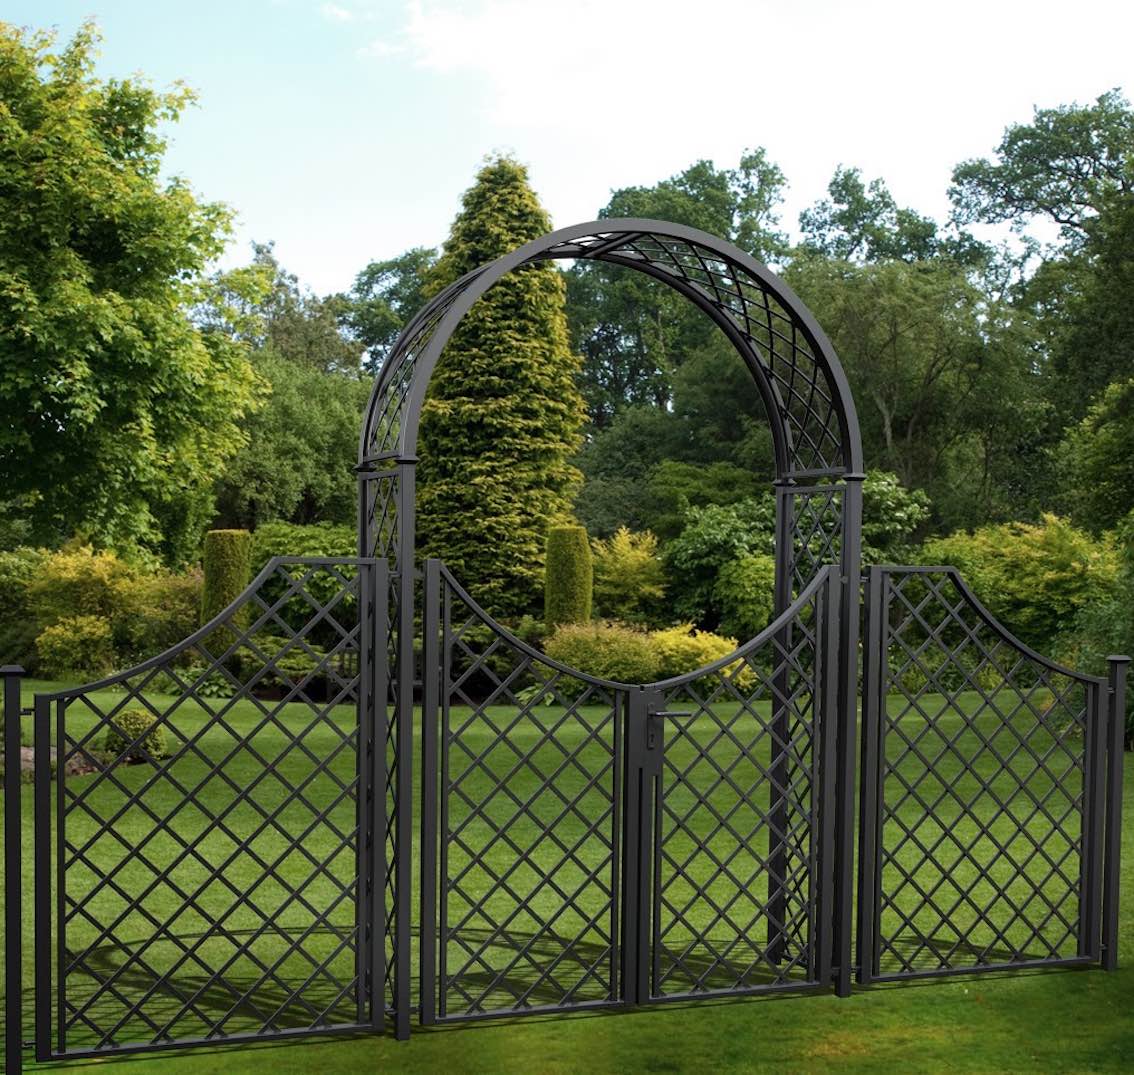 Metal Round Top Garden Arch with Double Gate and Side Fence as Entrance to a Park